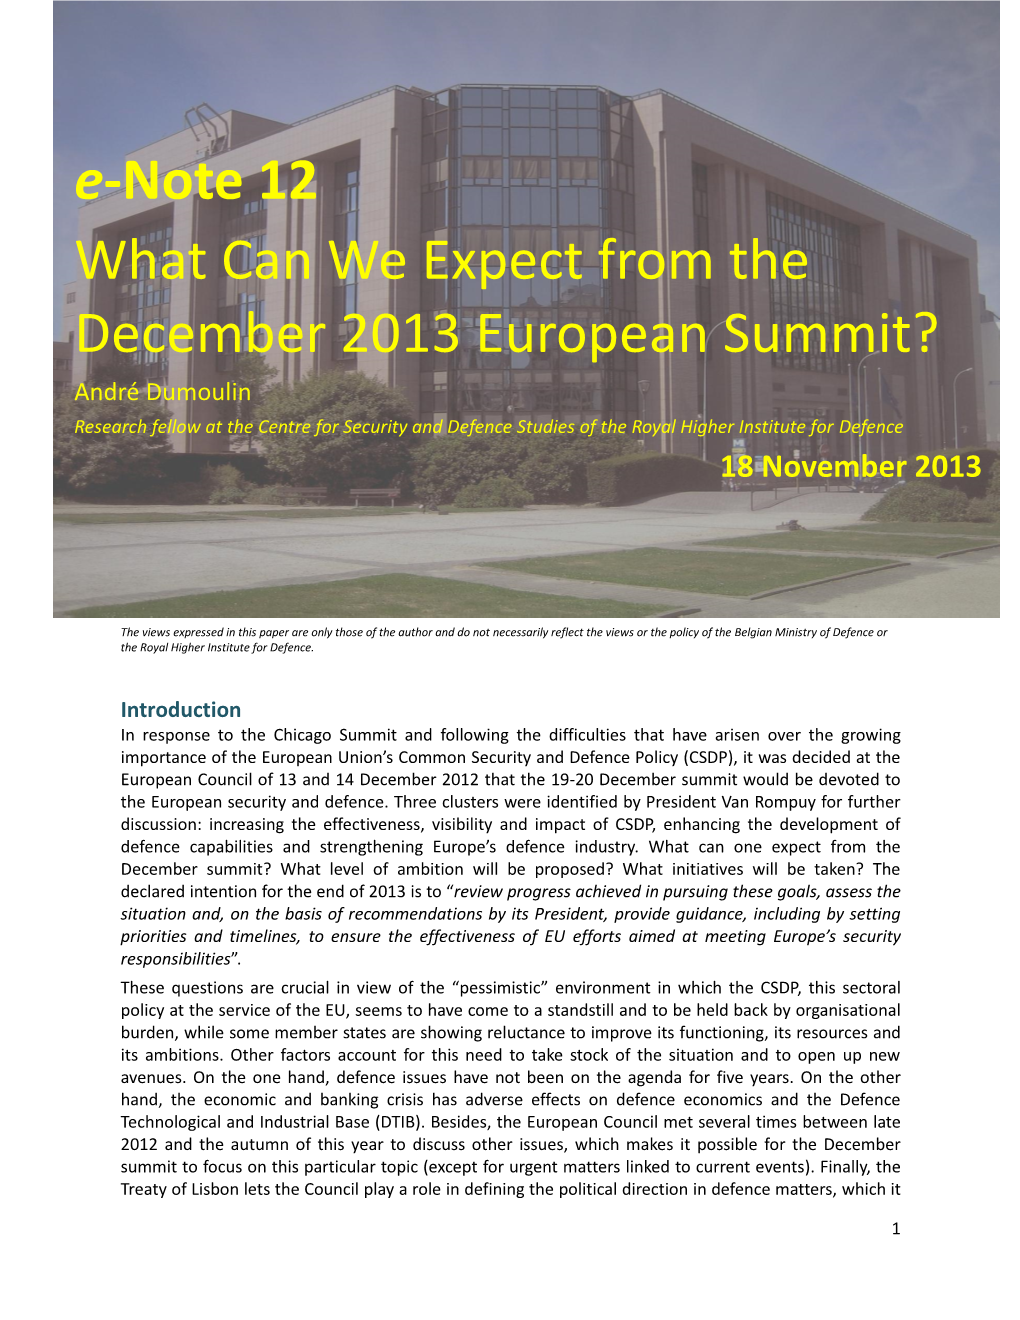 E-Note 12 What Can We Expect from the December 2013 European